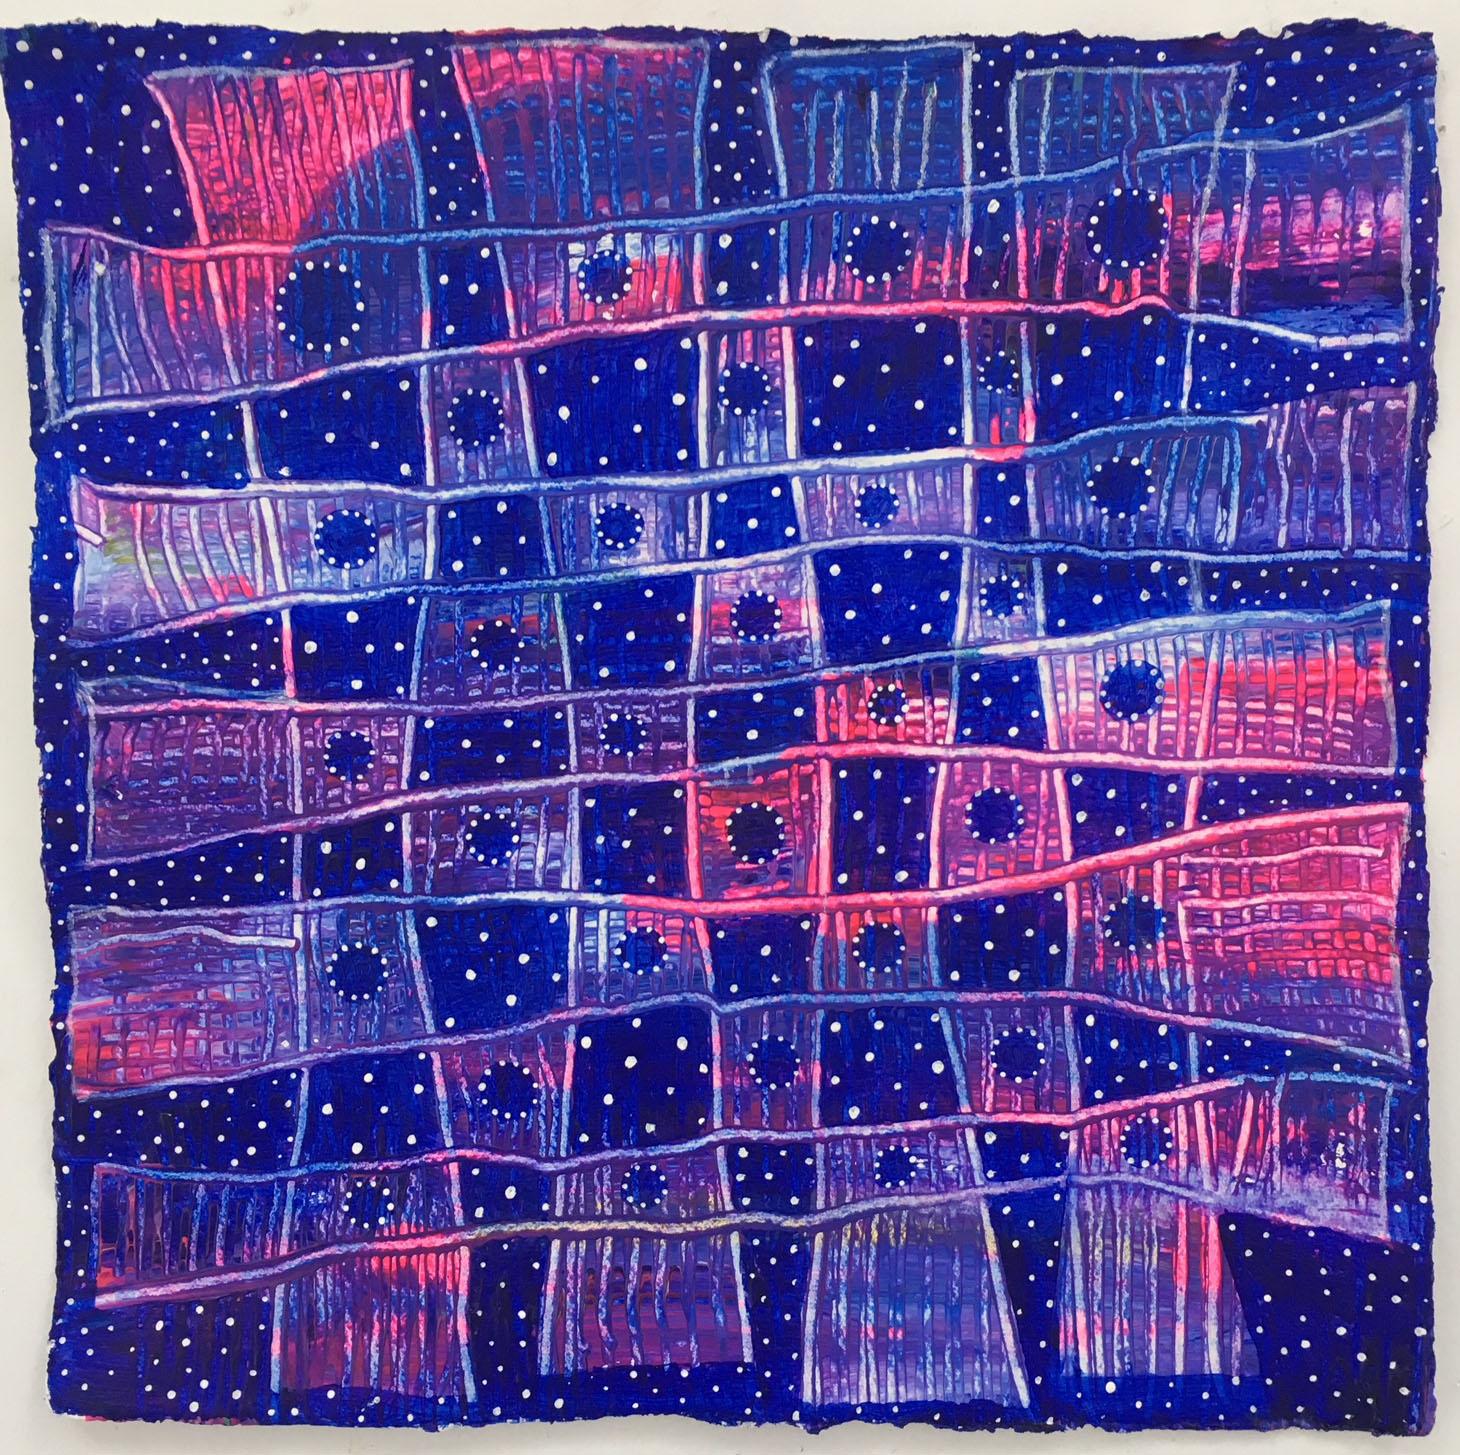 Andra Samelson, Dusk,  Acrylic on paper, 12 x 12 inches, 2018